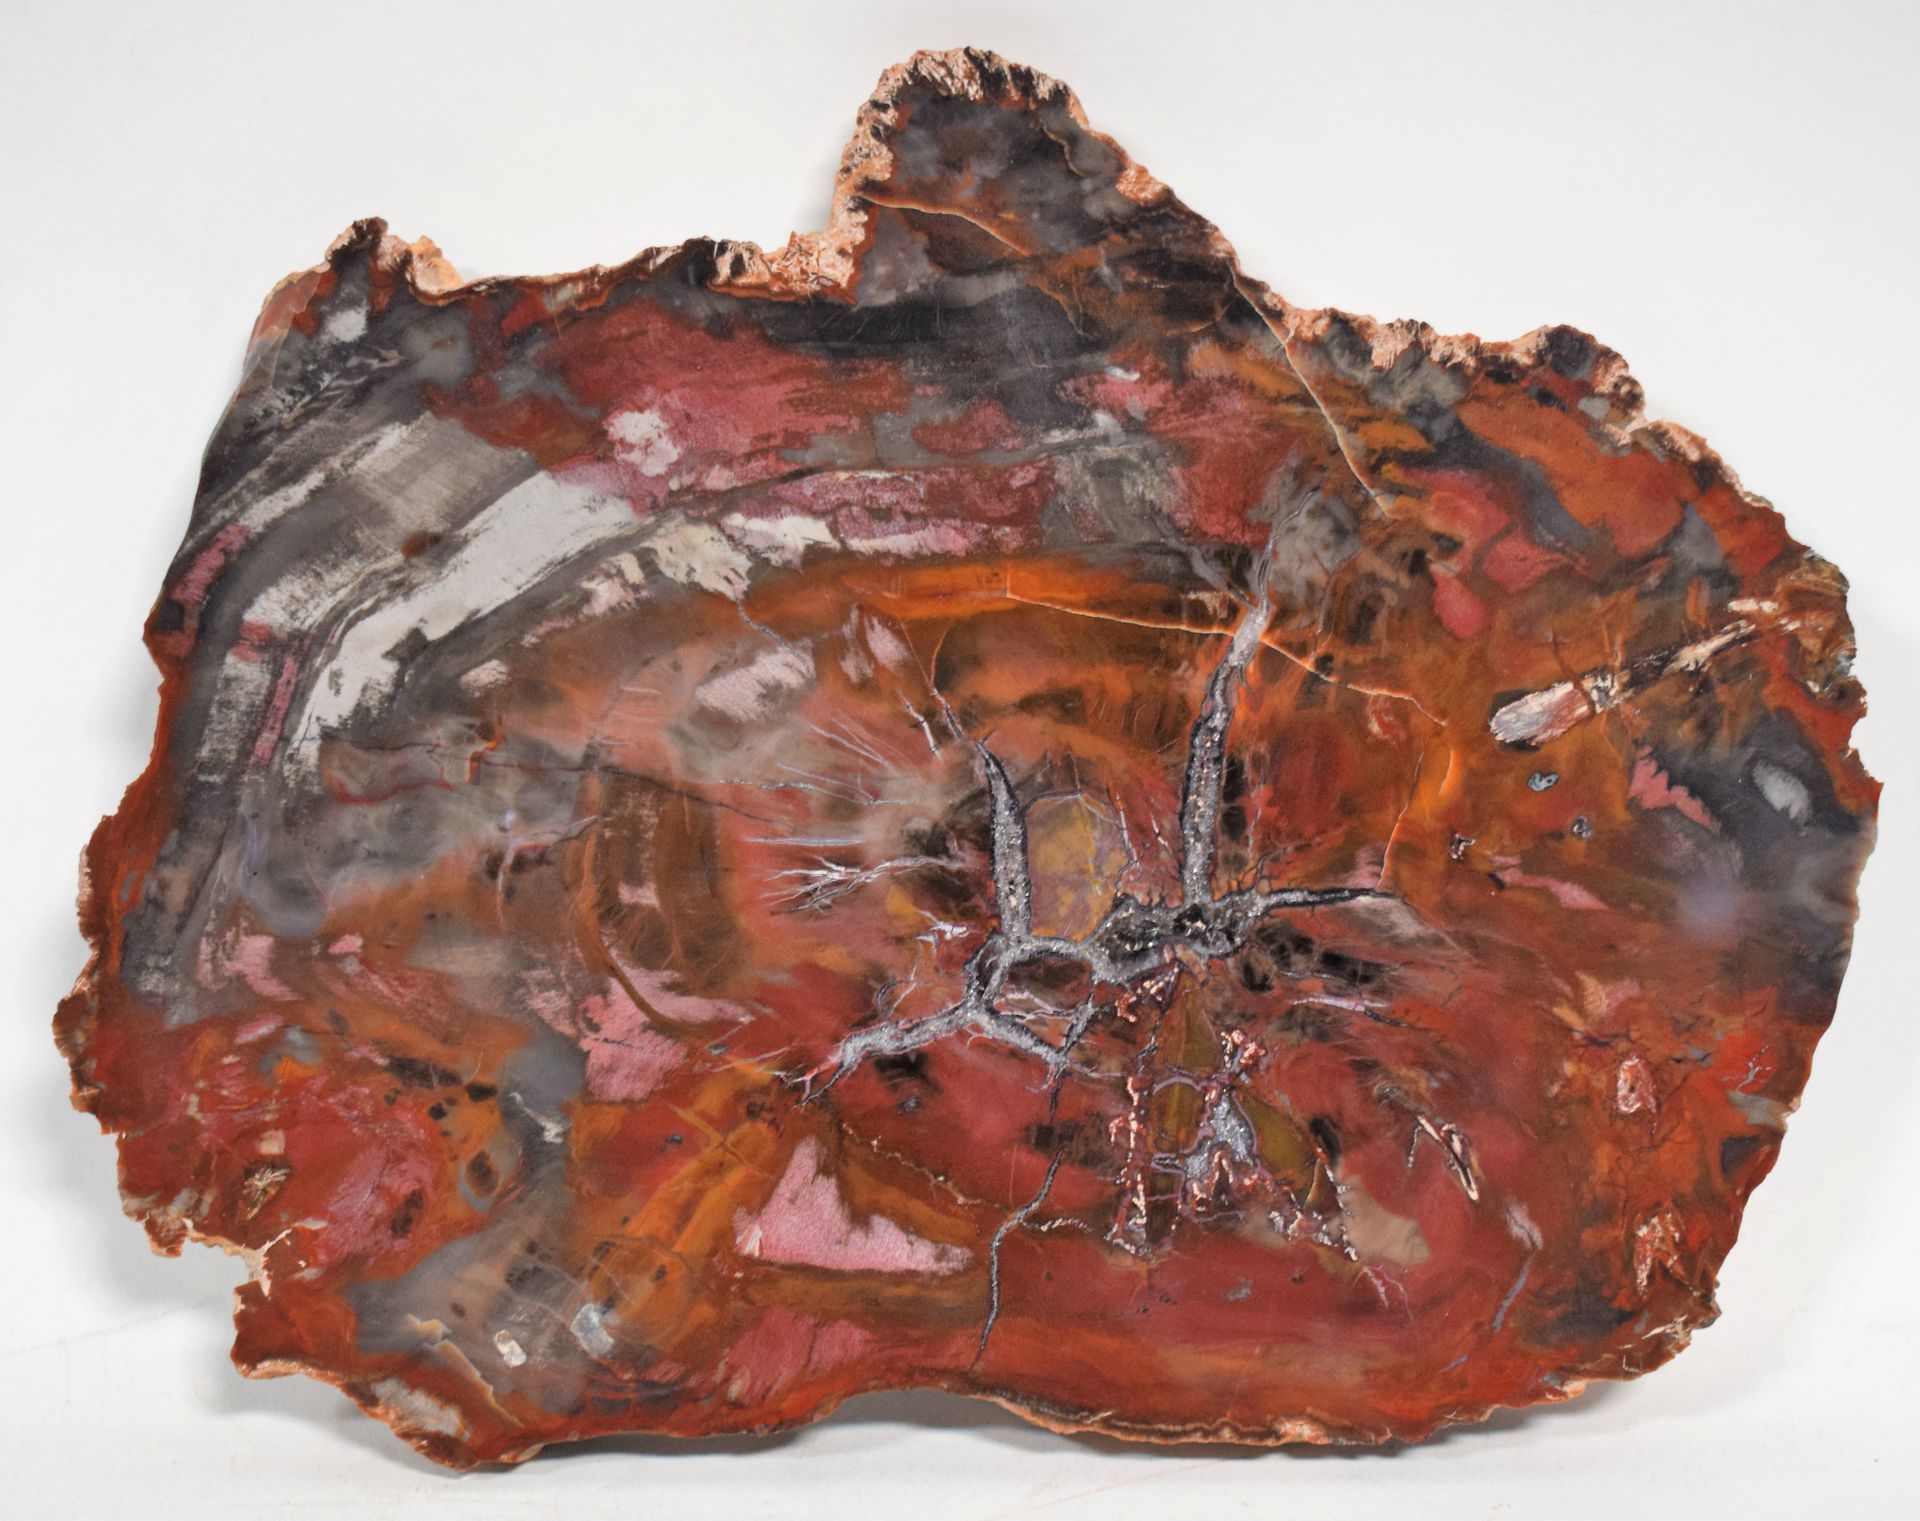 Null (FOSSILE) Petrified wood, red ochre and brown tints, 19 x 24.5 cm

|

(FOSS&hellip;